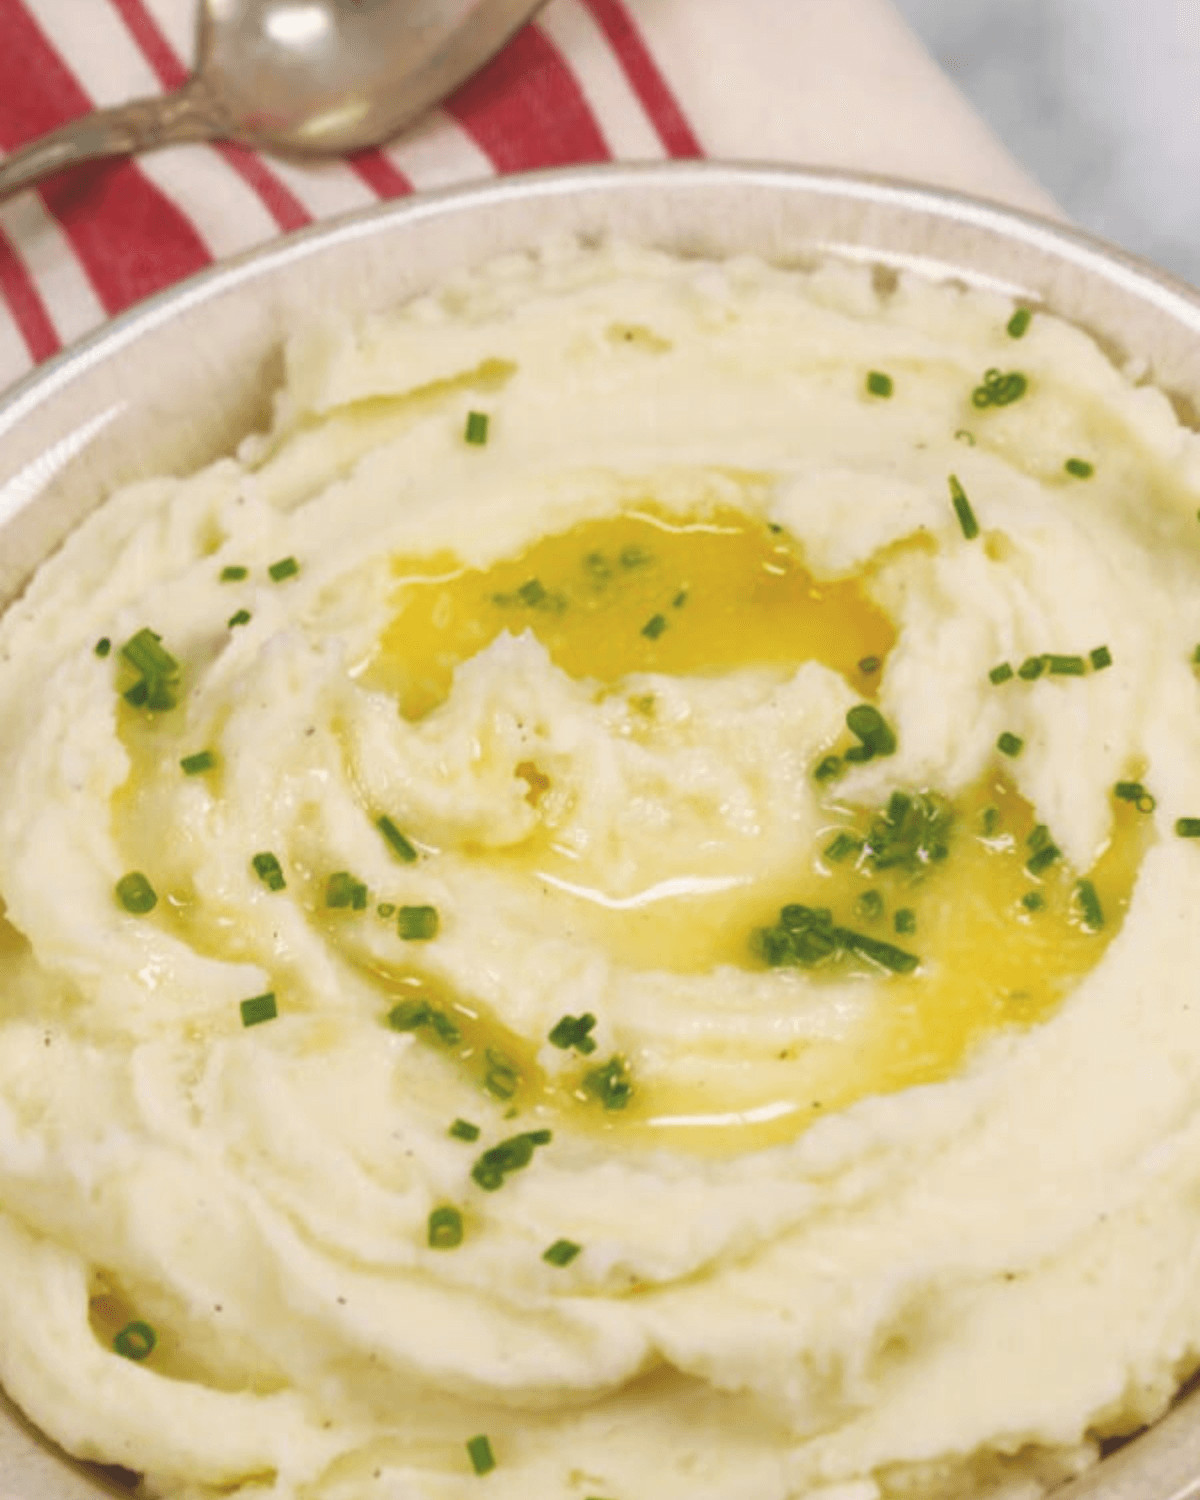 A bowl filled with whipped mashed potatoes.